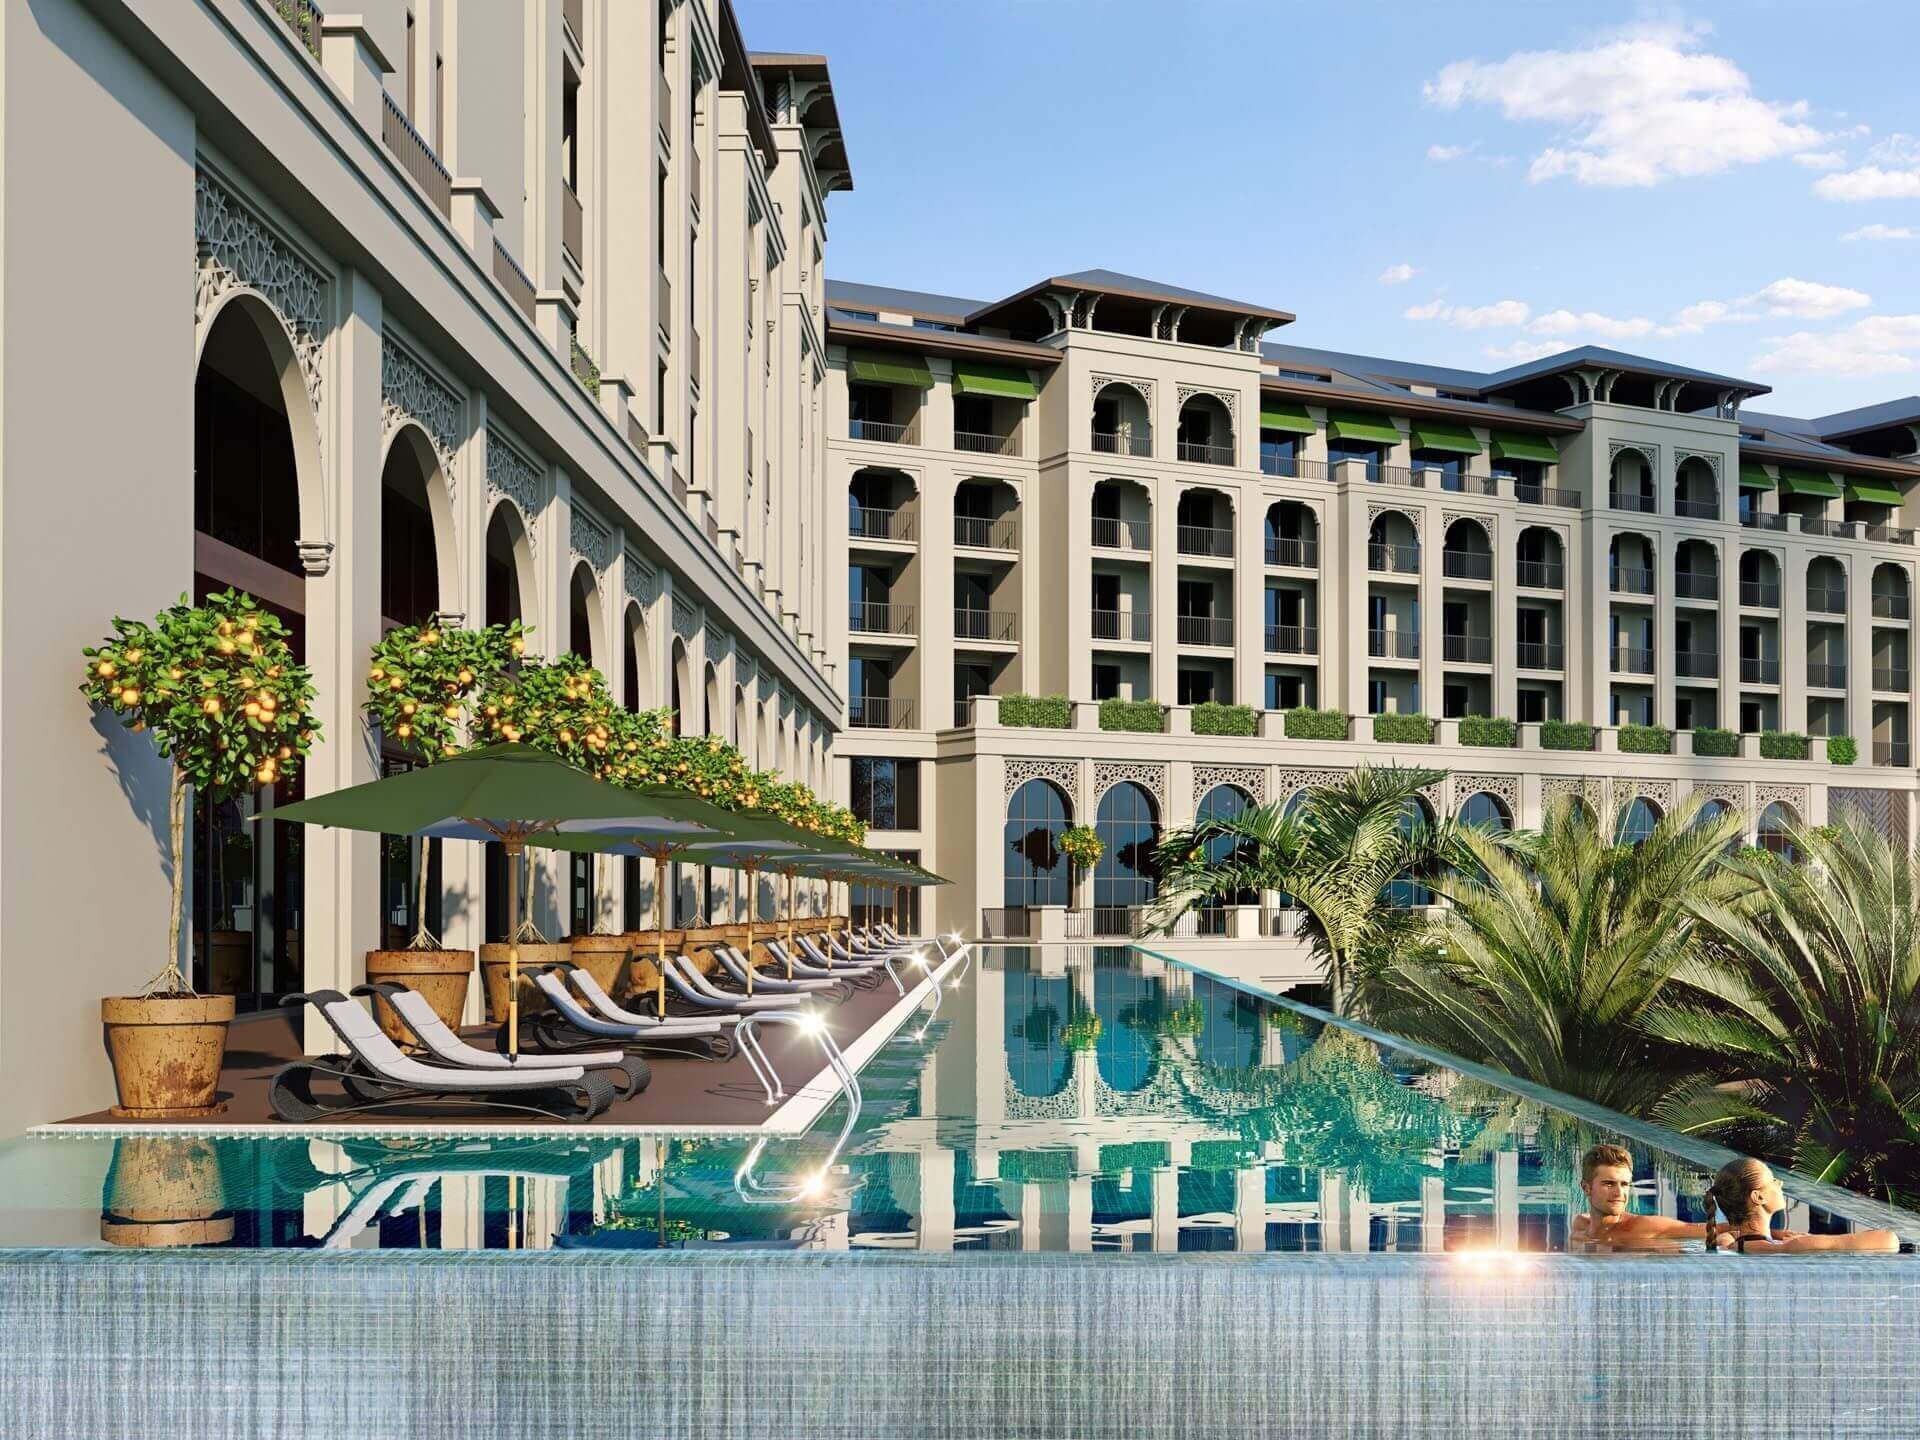 Cullinan Belek resort in Turkey, overlooking the swim up rool with sun loungers and palm trees